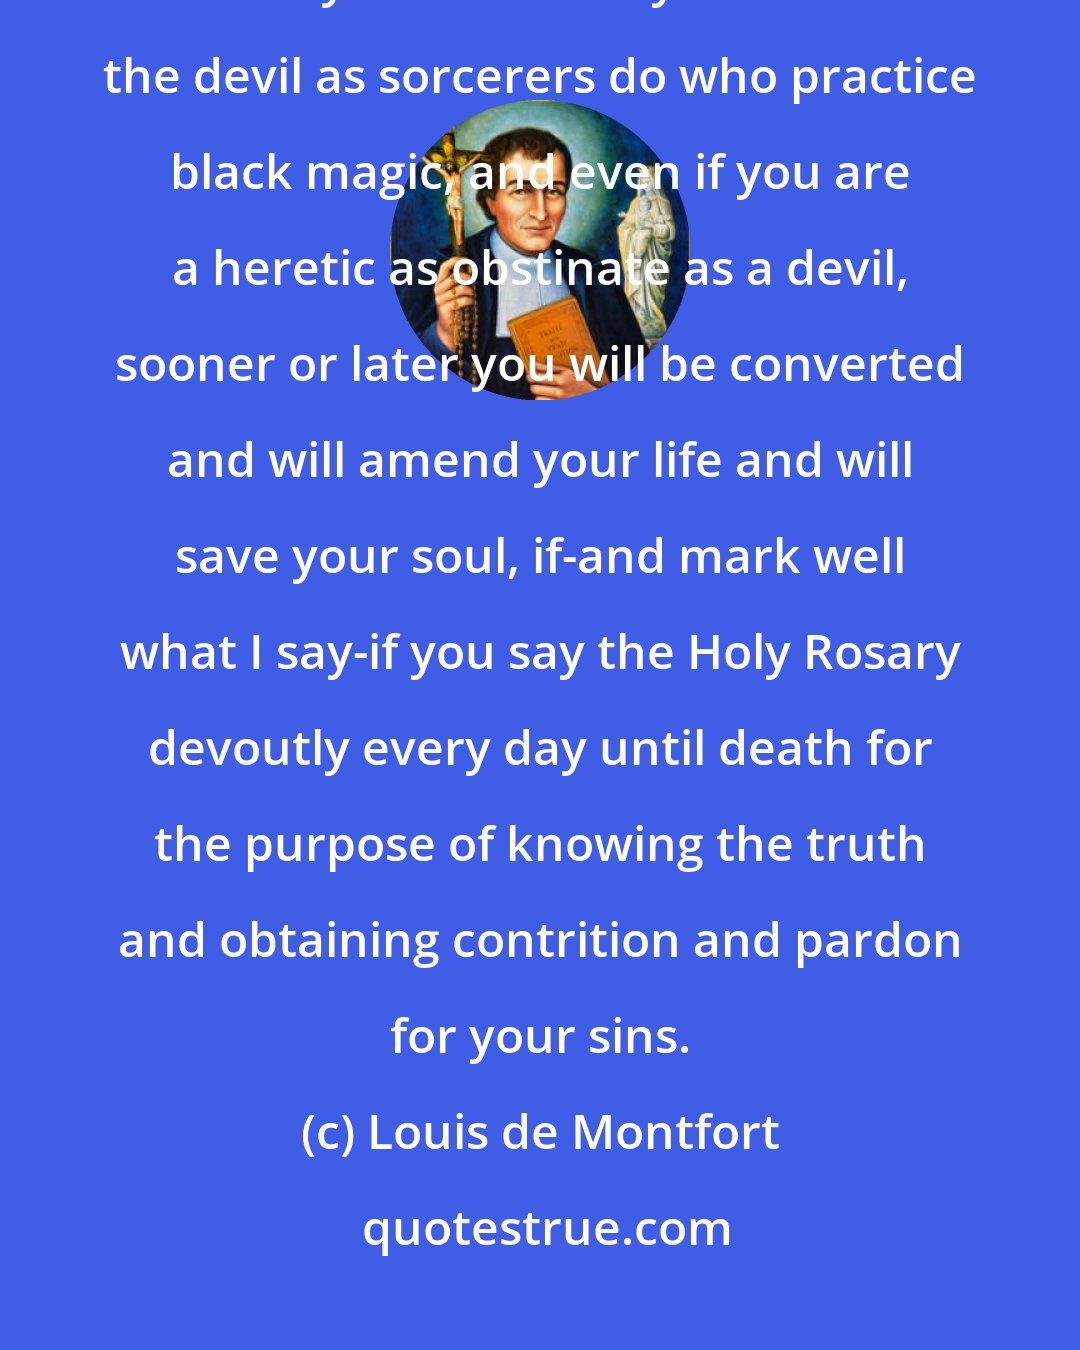 Louis de Montfort: Even if you are on the brink of damnation, even if you have one foot in hell, even if you have sold your soul to the devil as sorcerers do who practice black magic, and even if you are a heretic as obstinate as a devil, sooner or later you will be converted and will amend your life and will save your soul, if-and mark well what I say-if you say the Holy Rosary devoutly every day until death for the purpose of knowing the truth and obtaining contrition and pardon for your sins.